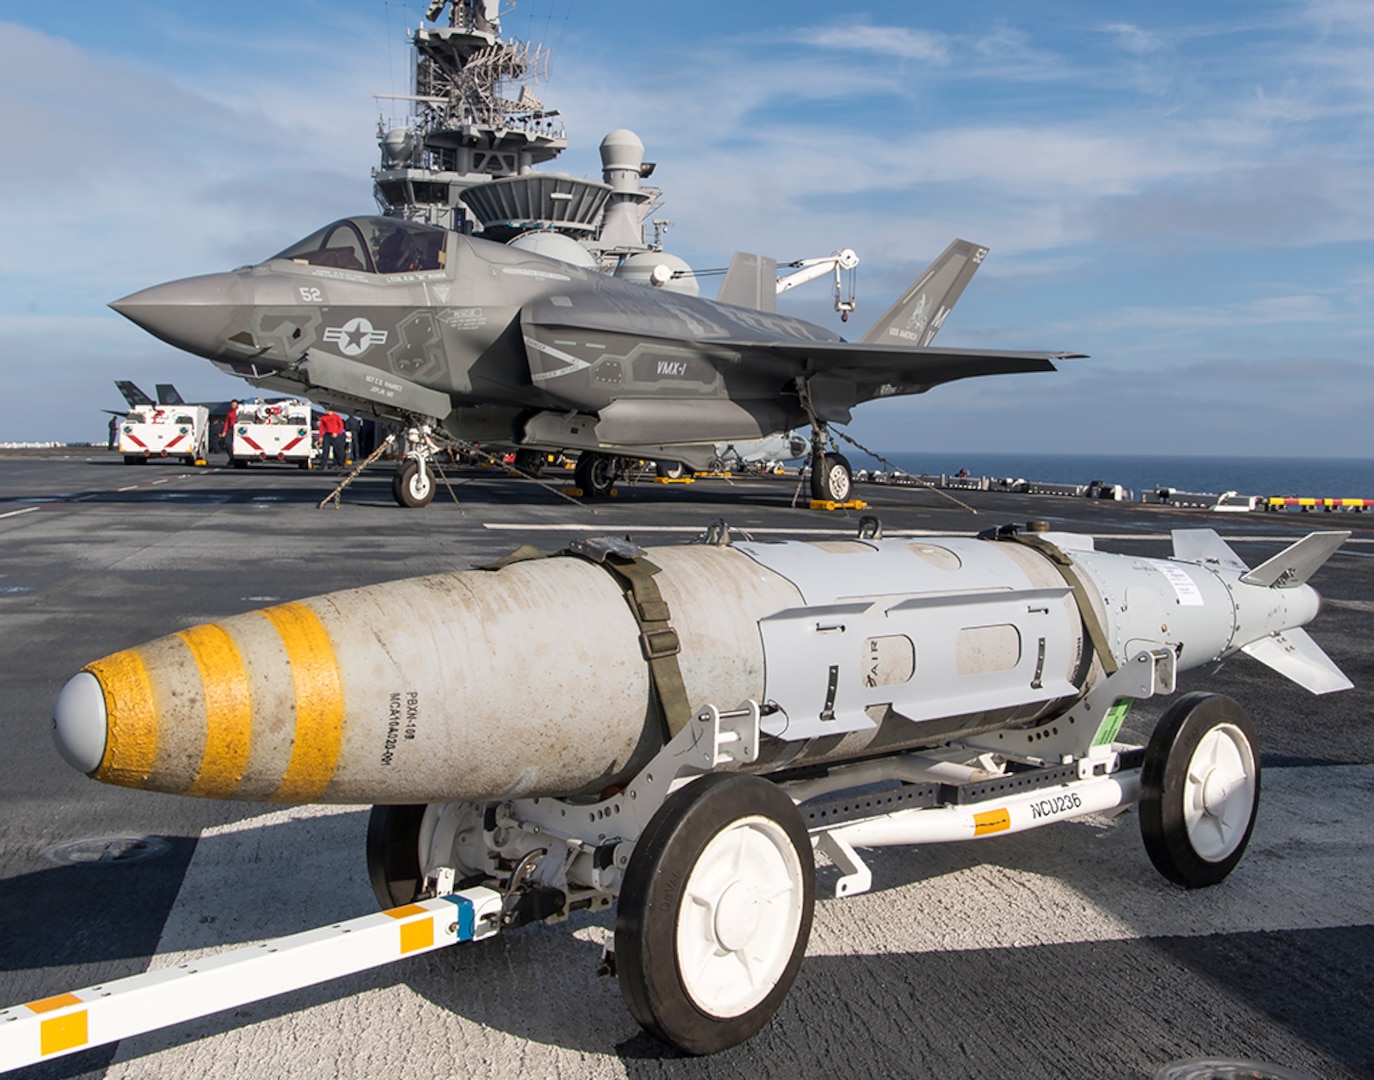 Ordnance is prepared for an F-35B Lightning II short takeoff/vertical landing (STOVL) aircraft on the amphibious assault ship USS America (LHA 6). This event marked the first live ordnance uploaded to the F-35B at sea, Nov. 5, 2016.  During the third and final F-35B developmental test phase (DT-III), the aircraft is undergoing envelope expansion via a series of launches and recoveries in various operating conditions such as high sea states and high winds. 